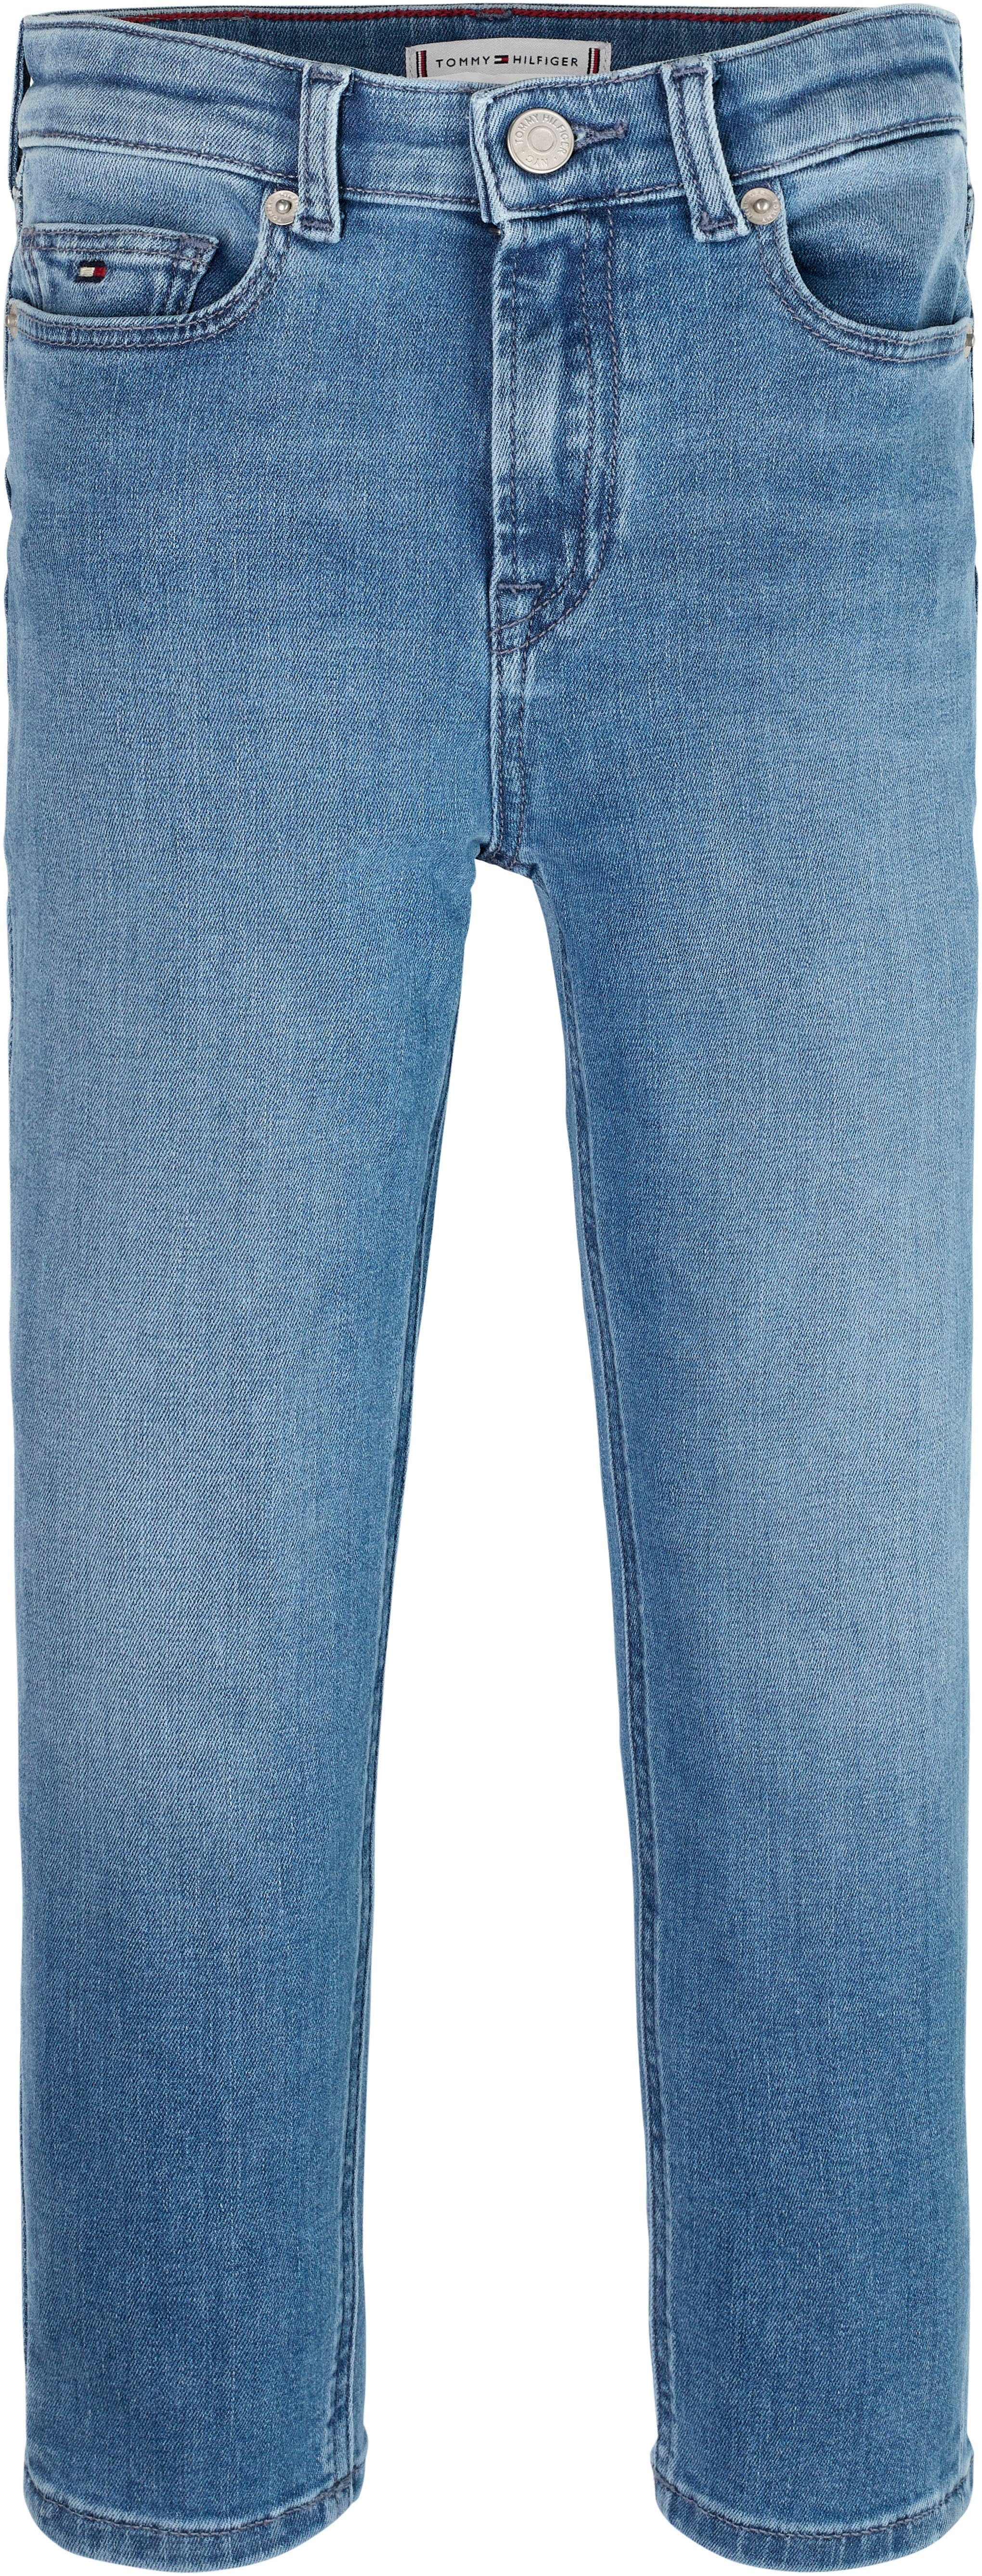 Hilfiger TAPERED 7/8-Länge Tapered-fit-Jeans Tommy in HR